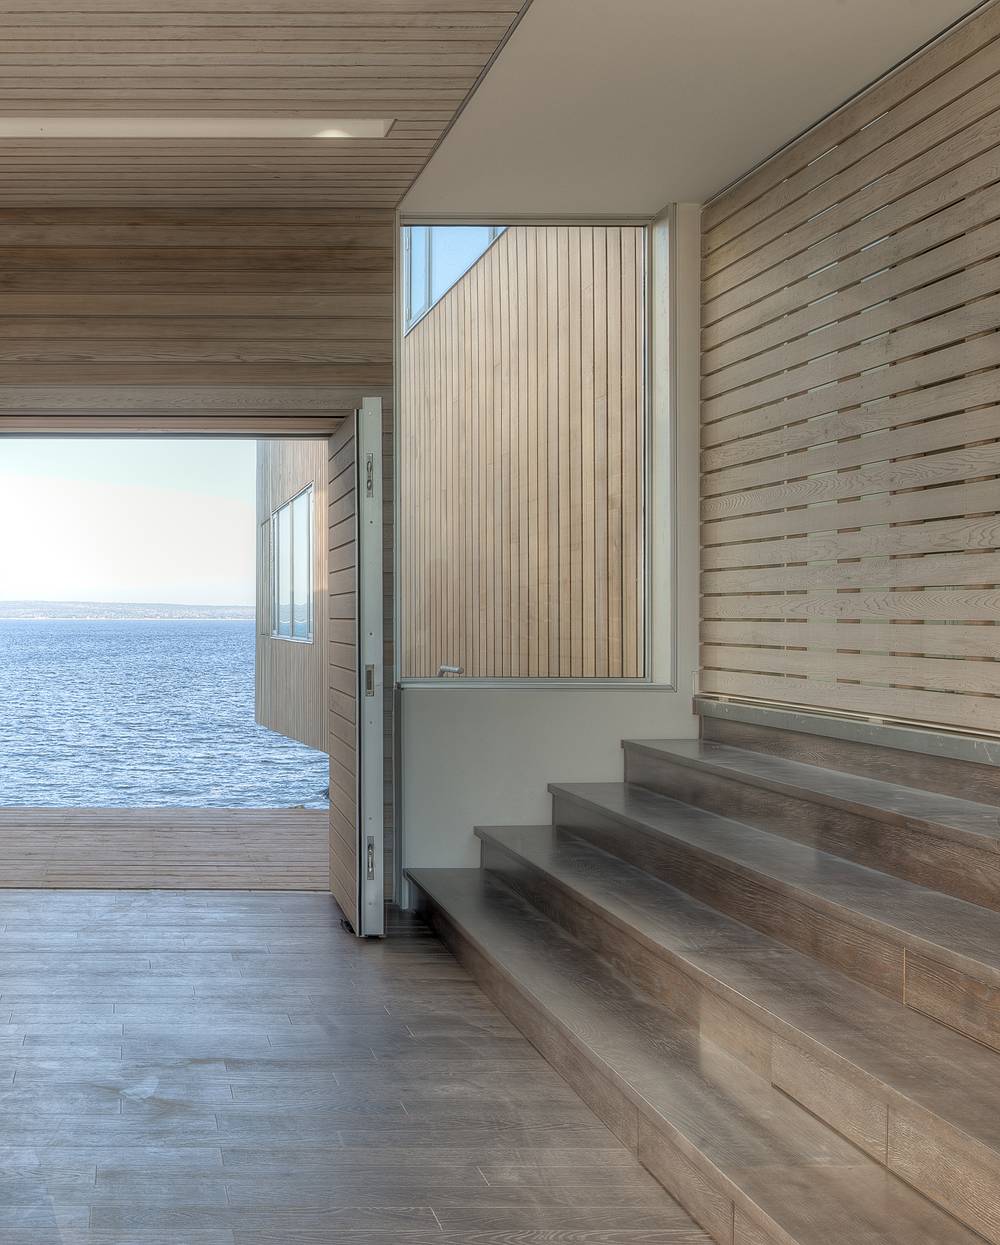 Panoramic Blue Outside Fabulous Panoramic Blue Sea View Outside The Two Hulls House With Wooden Floor And Wooden Shutters Dream Homes Stunning Cantilevered Home With Earthy Tones Of Minimalist Interior Designs